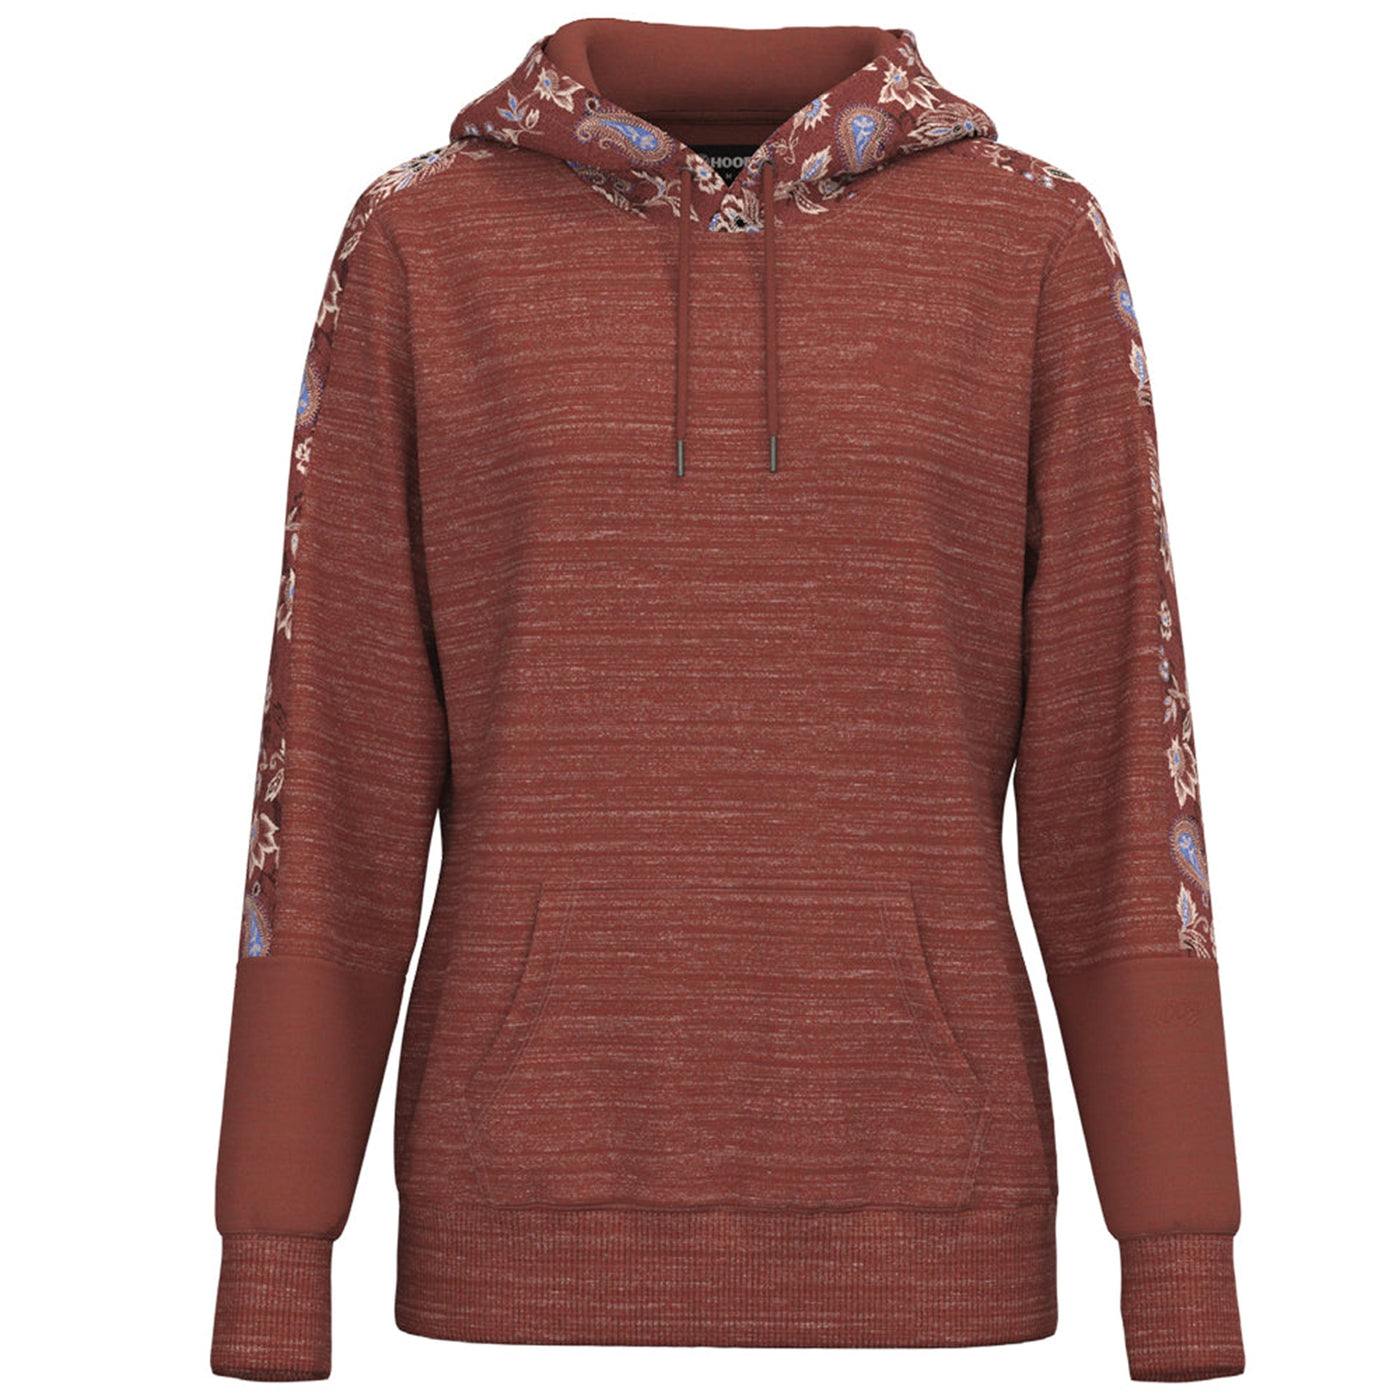 Hooey Women's Marsala and Floral Print Canyon Hoodie